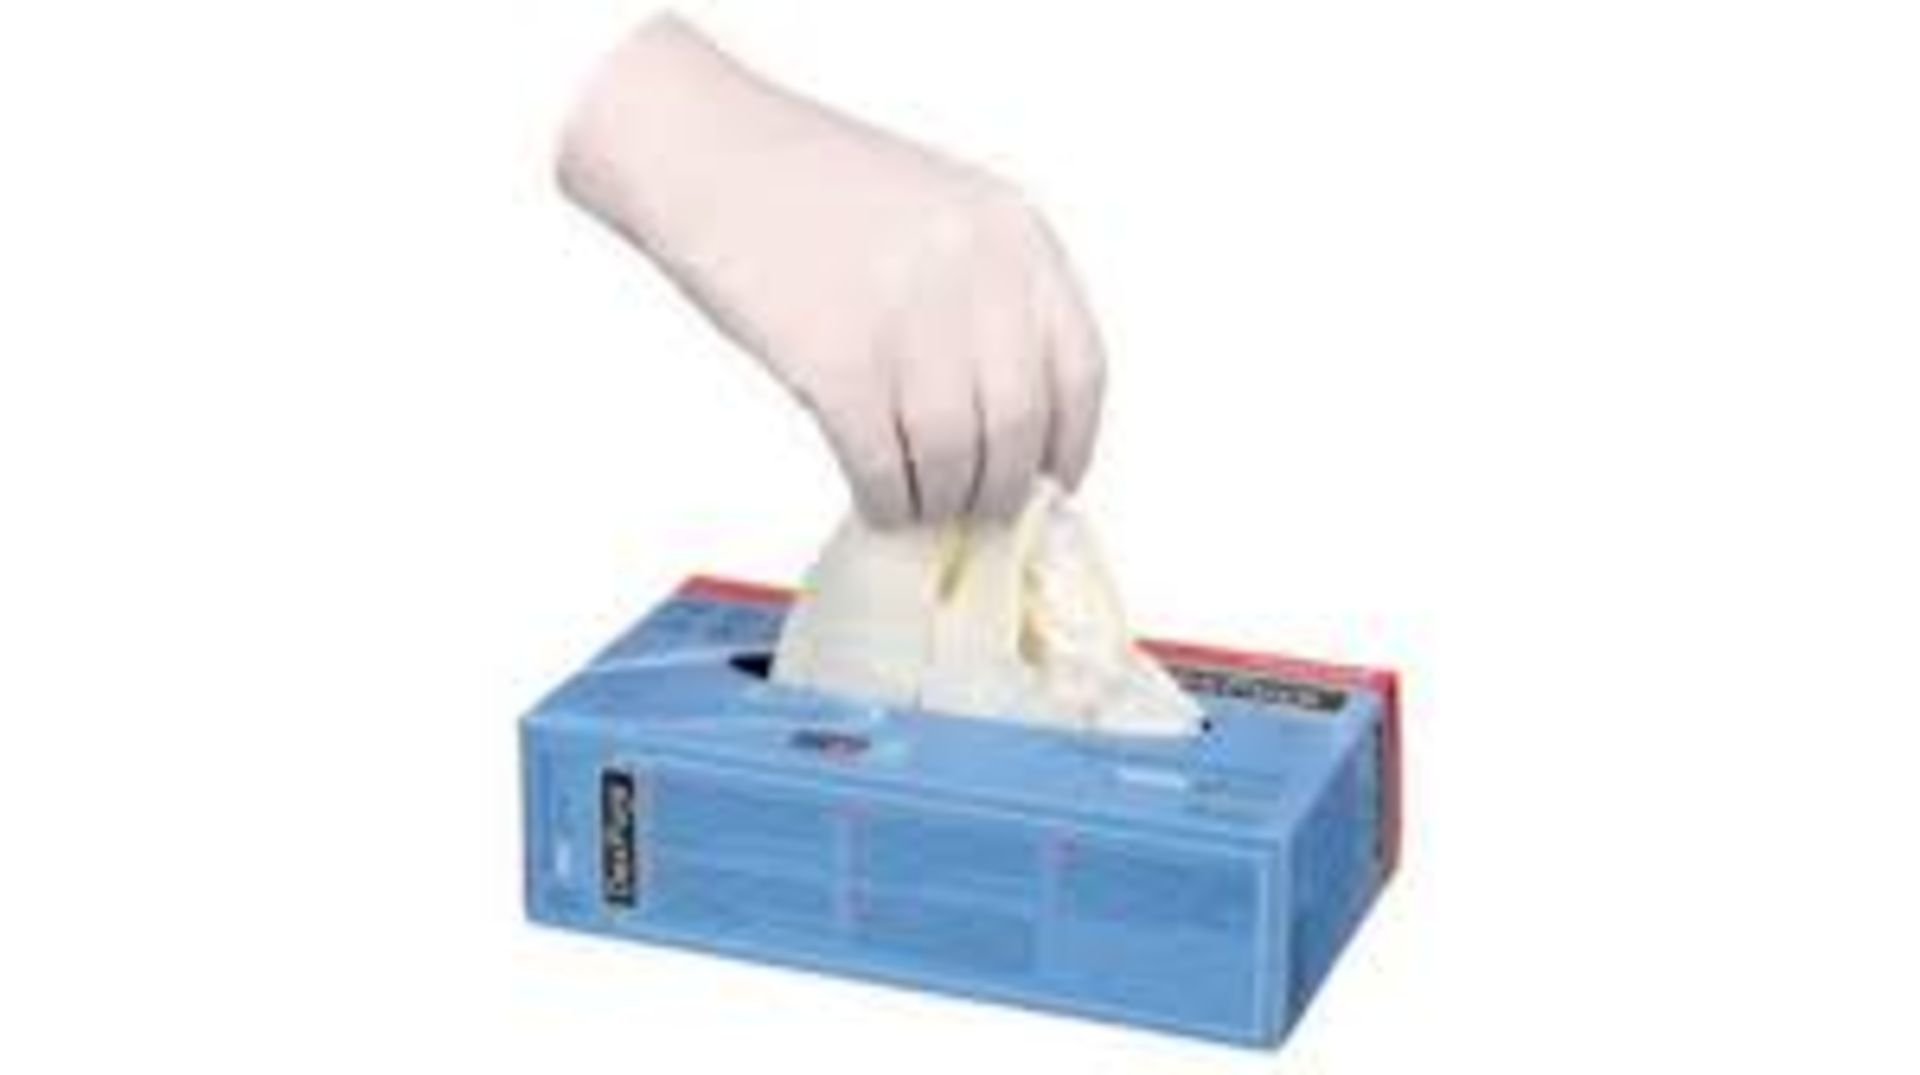 540 X BRAND NEW BOXES OF 100 HONEYWELL WHITE LATEX GLOVES SIZE LARGE EXP MAY 2024